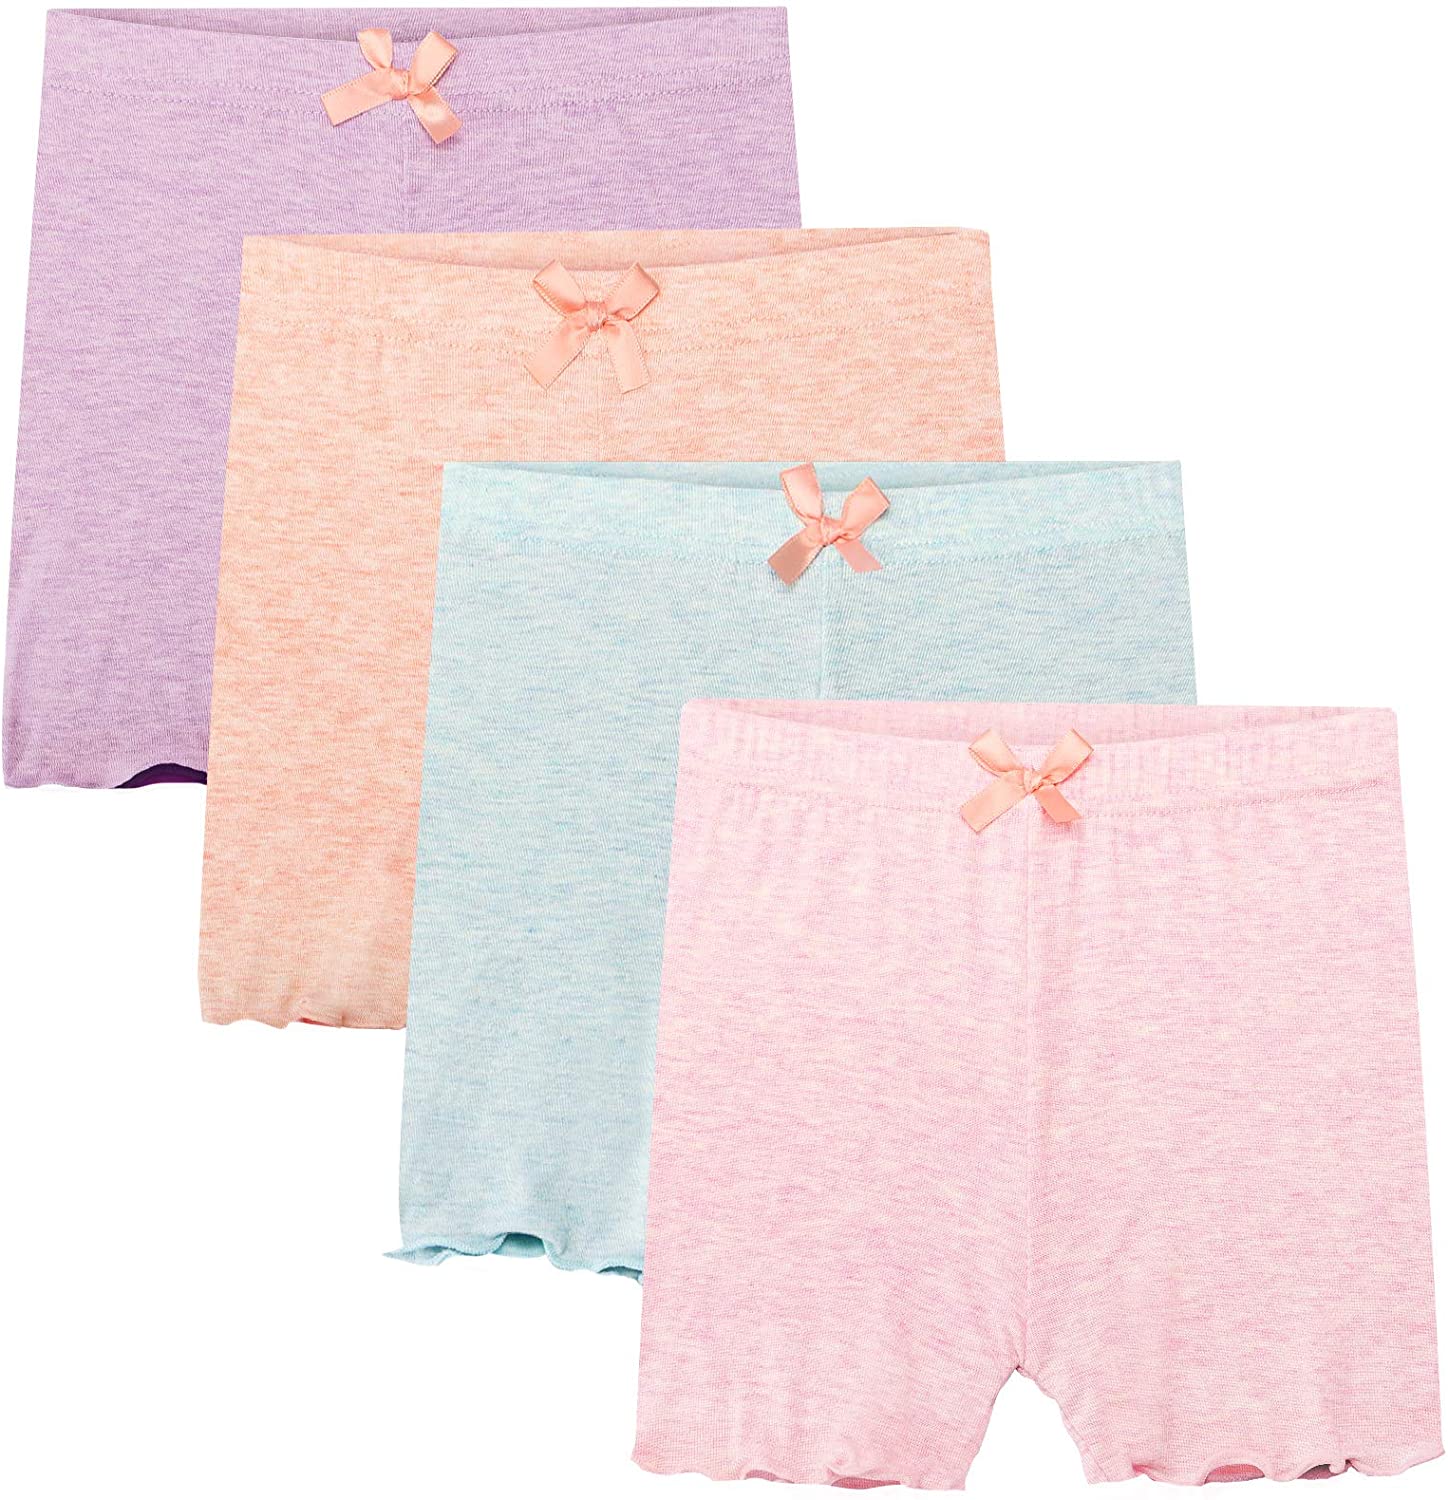 Auranso Girls Bike Shorts 4 Pack Girl’s Breathable and Safety Dance Shorts 3-10T